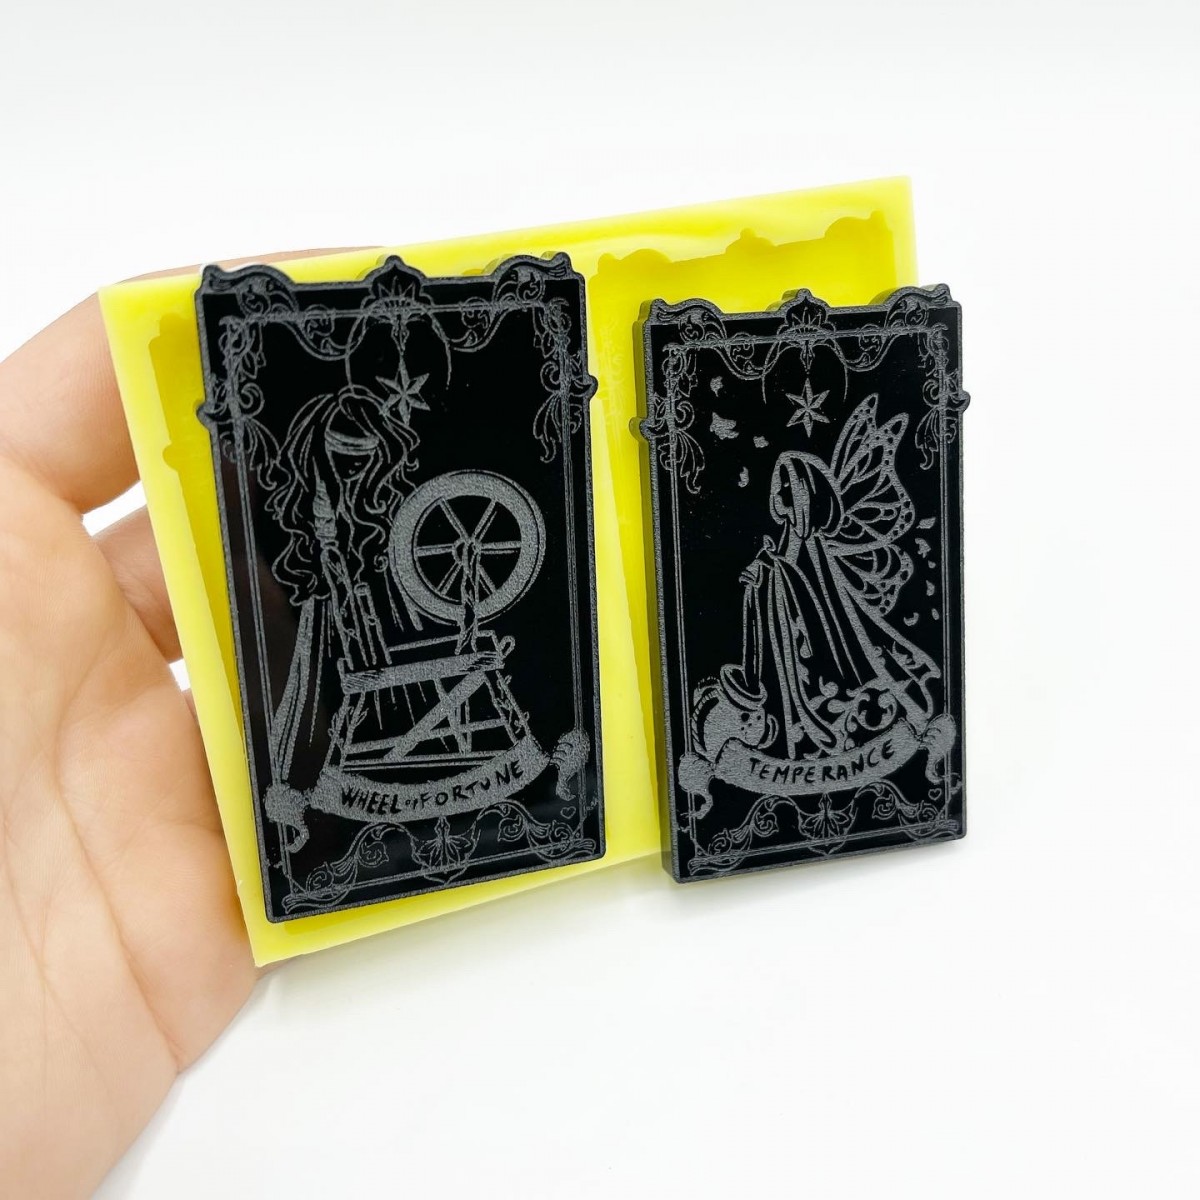 Set of "Temperance" and "The Wheel of Fortune" Tarot Cards Mold - medium size